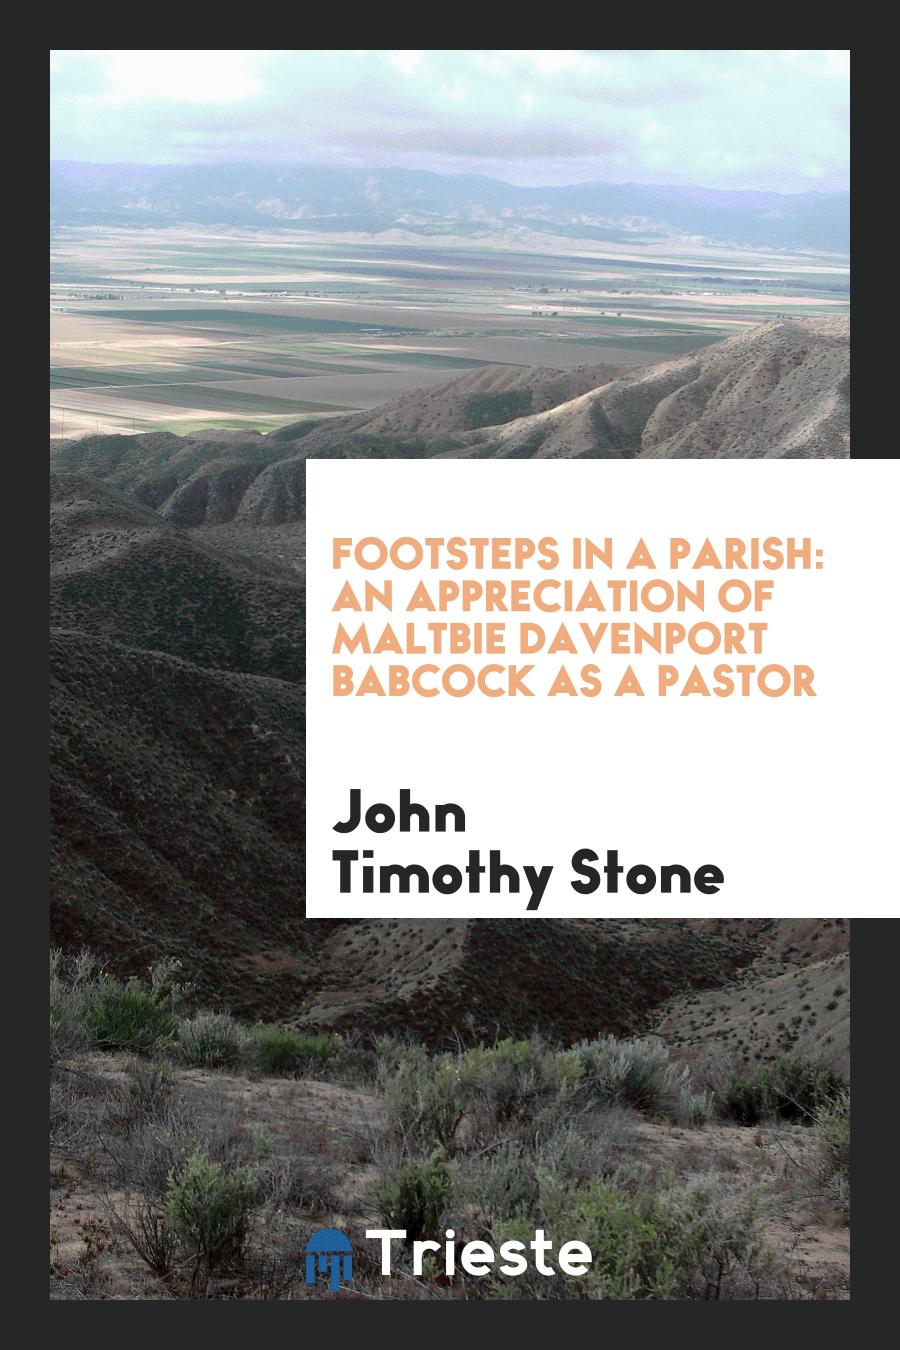 Footsteps in a Parish: An Appreciation of Maltbie Davenport Babcock as a Pastor